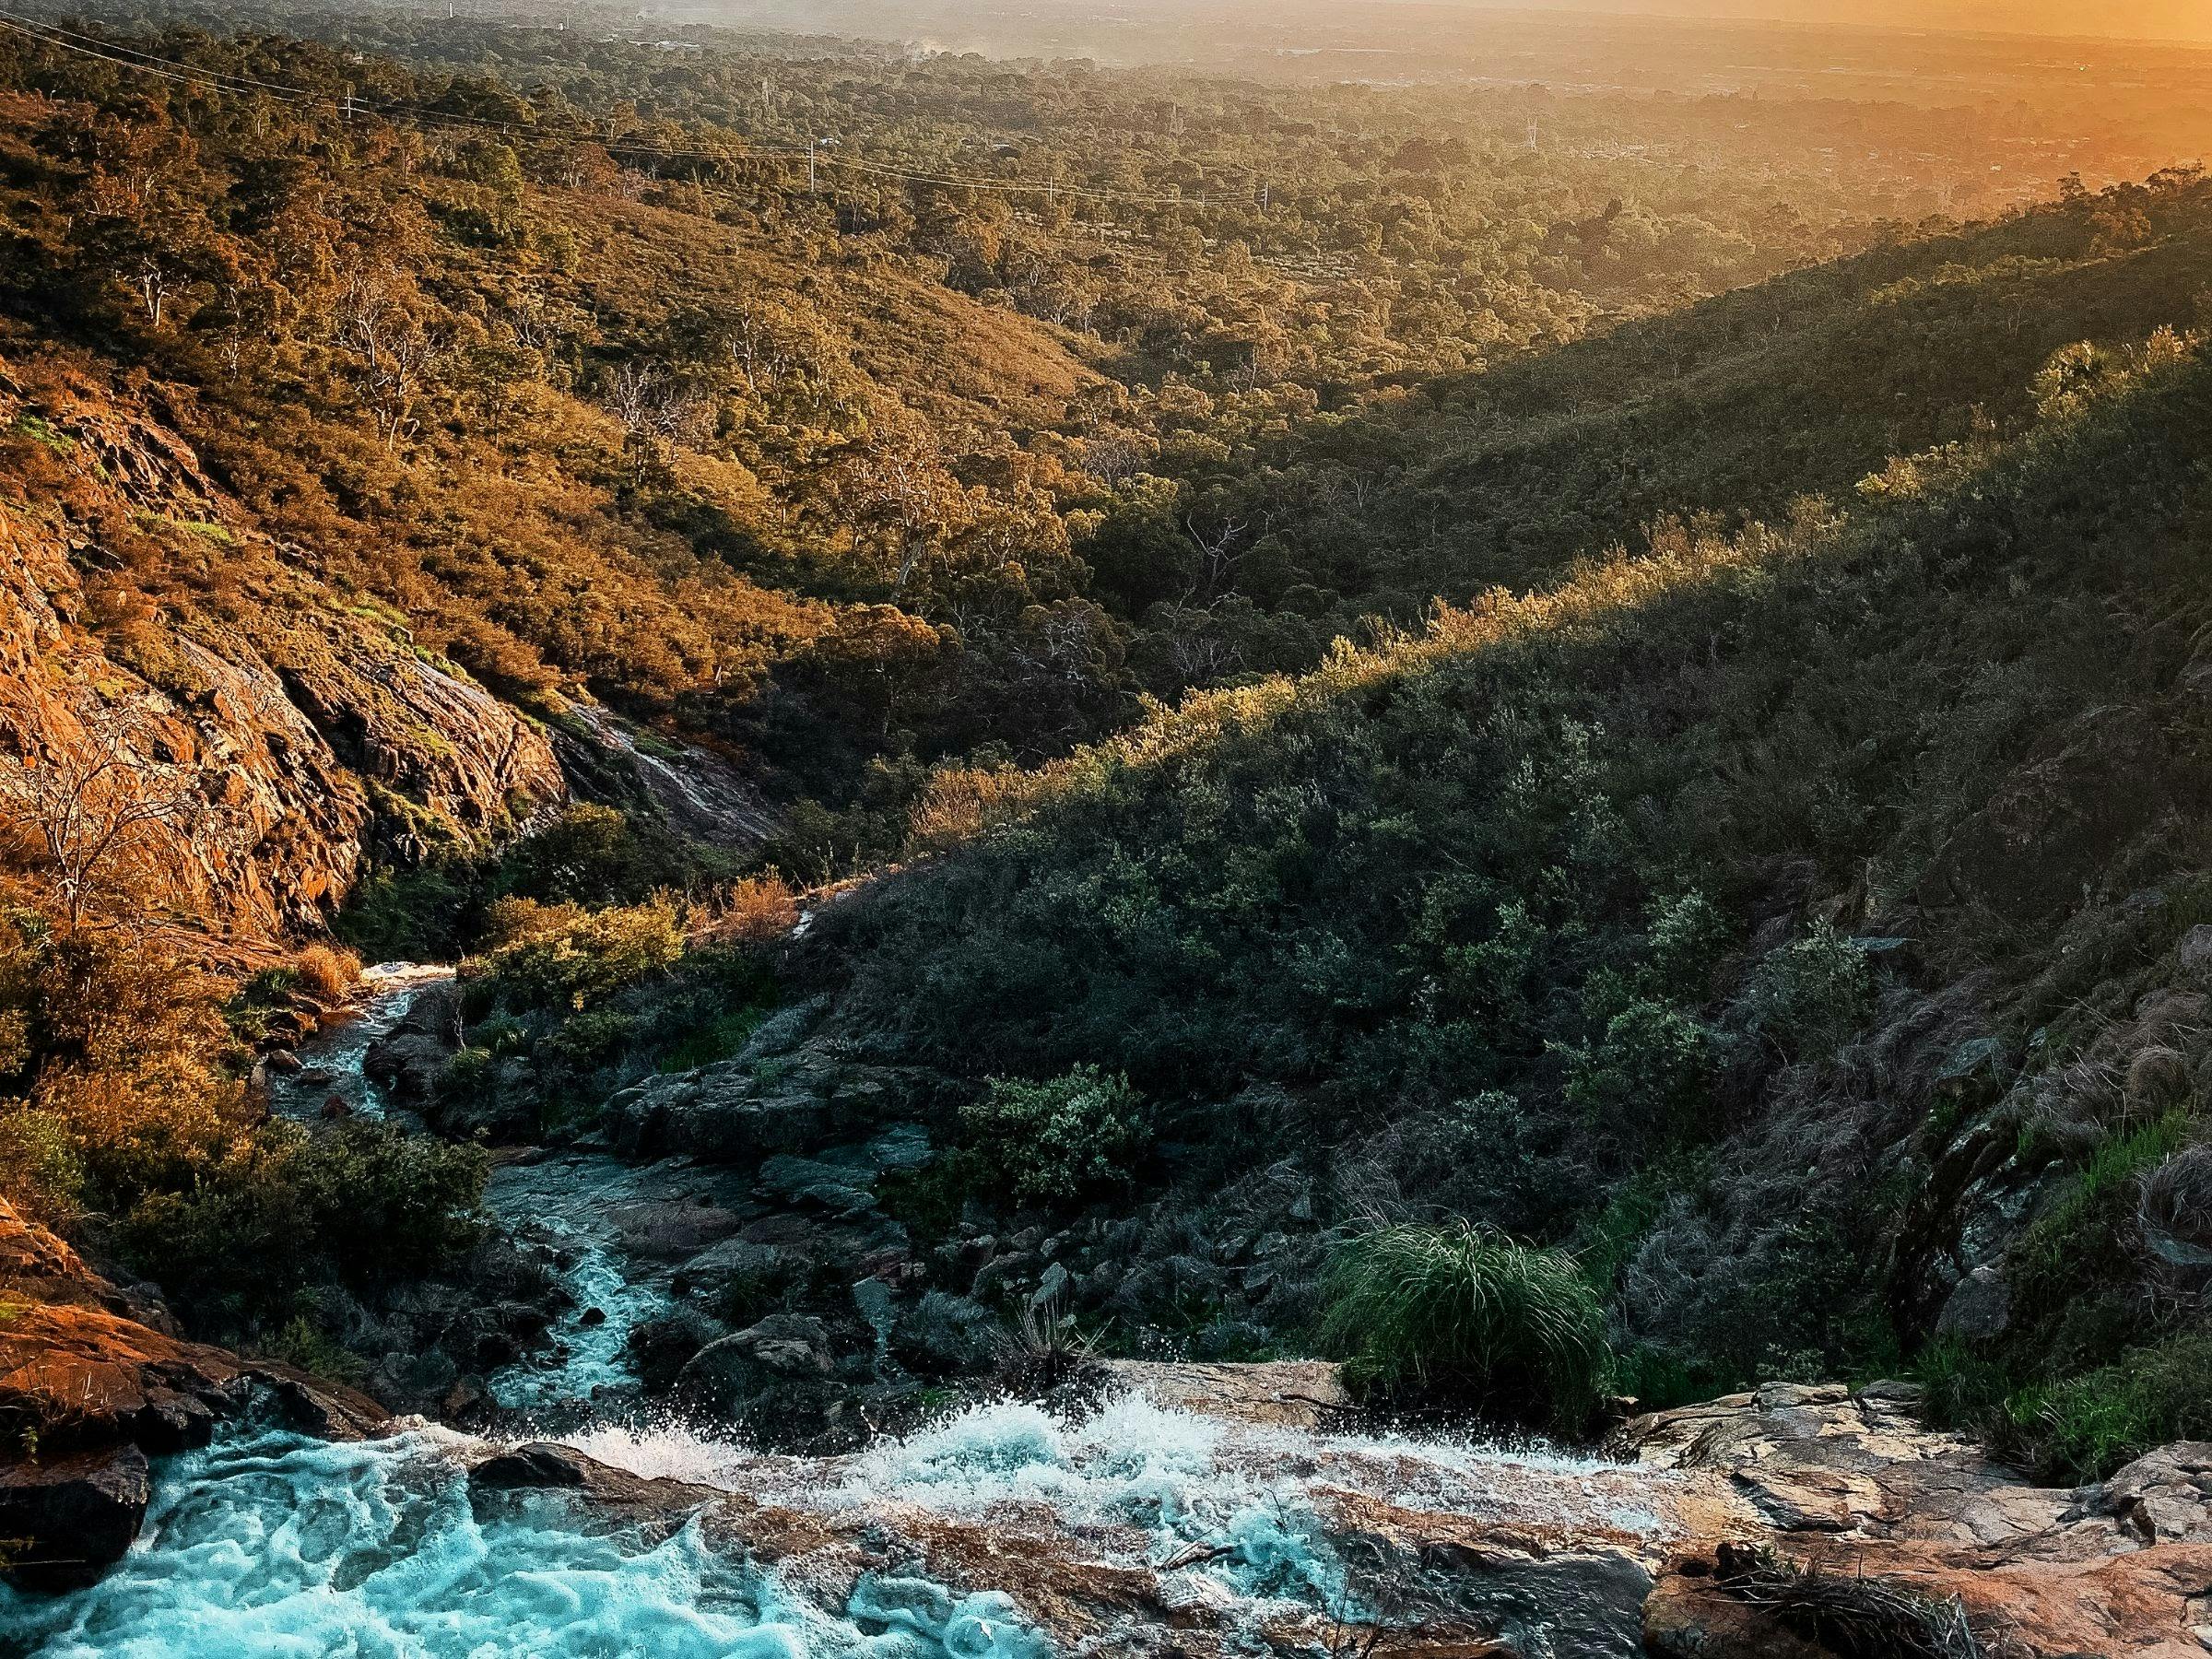 Sunset guided hike at Lesmurdie falls